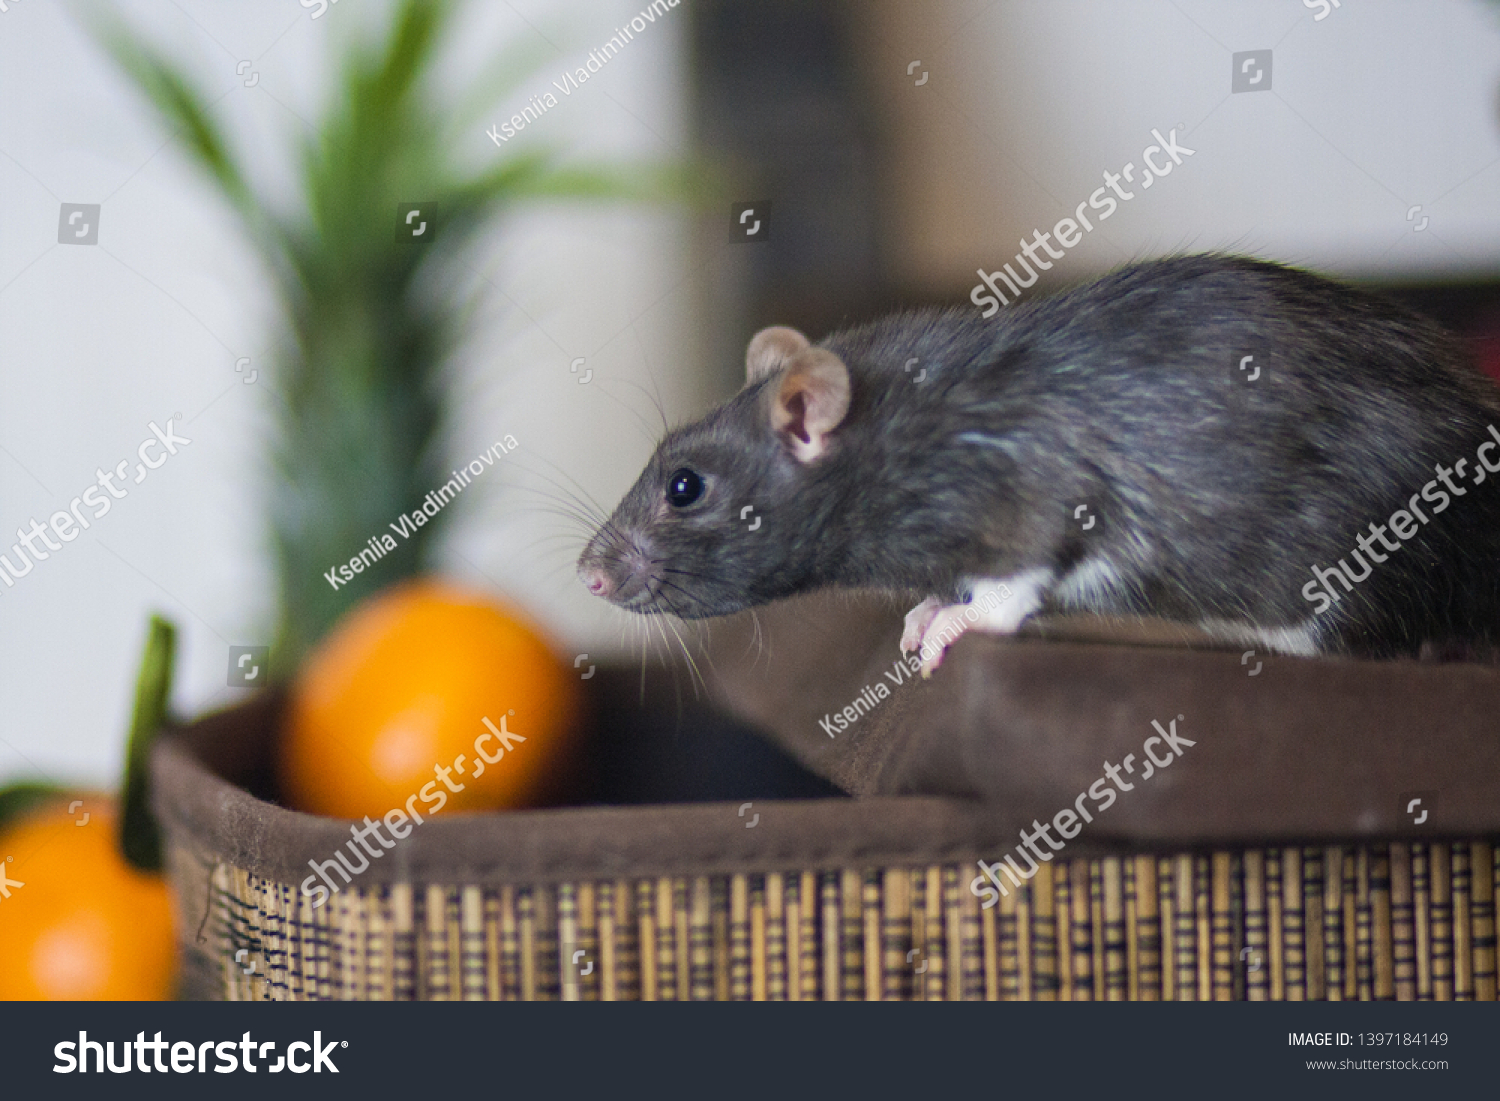 Fruit warehouse. Gray mouse. Gray rat Gray mouse steals food. The gray rat eats fruit. #1397184149